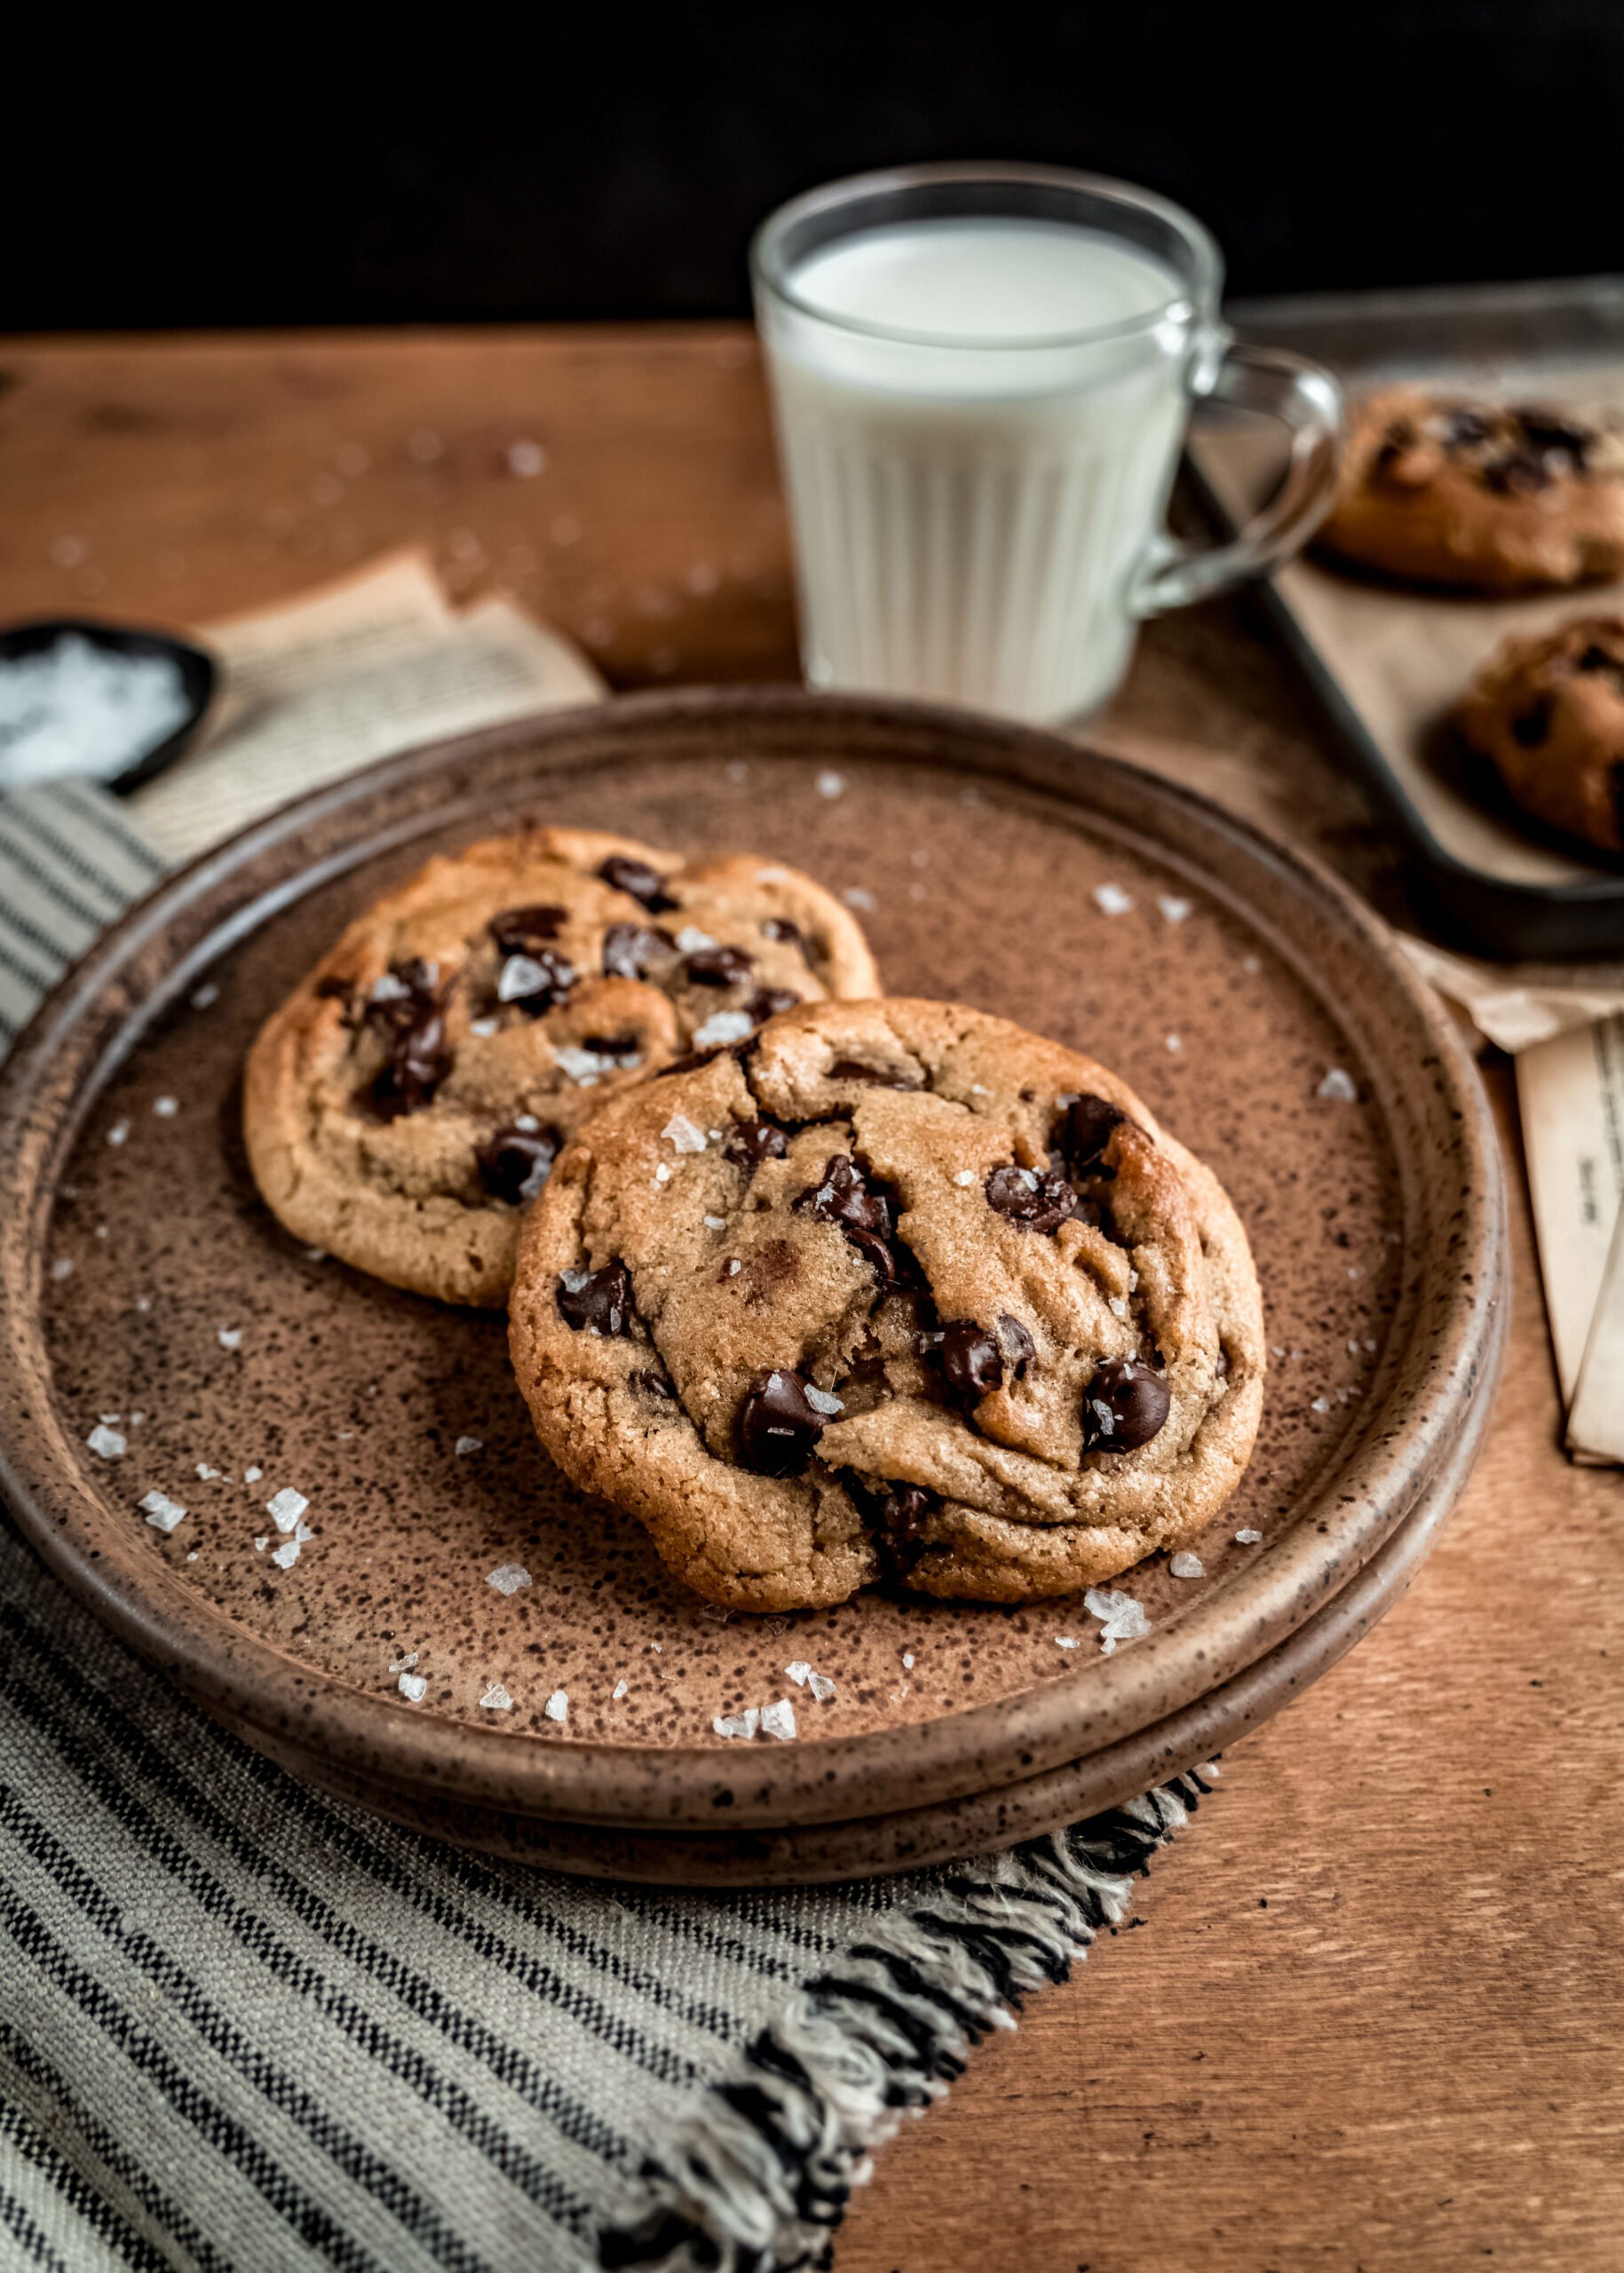 Side shot of two chocolate chip cookies on brown plate with a striped napkin, a glass of milk and a cookie sheet with baked chocolate chip cookies in the background 